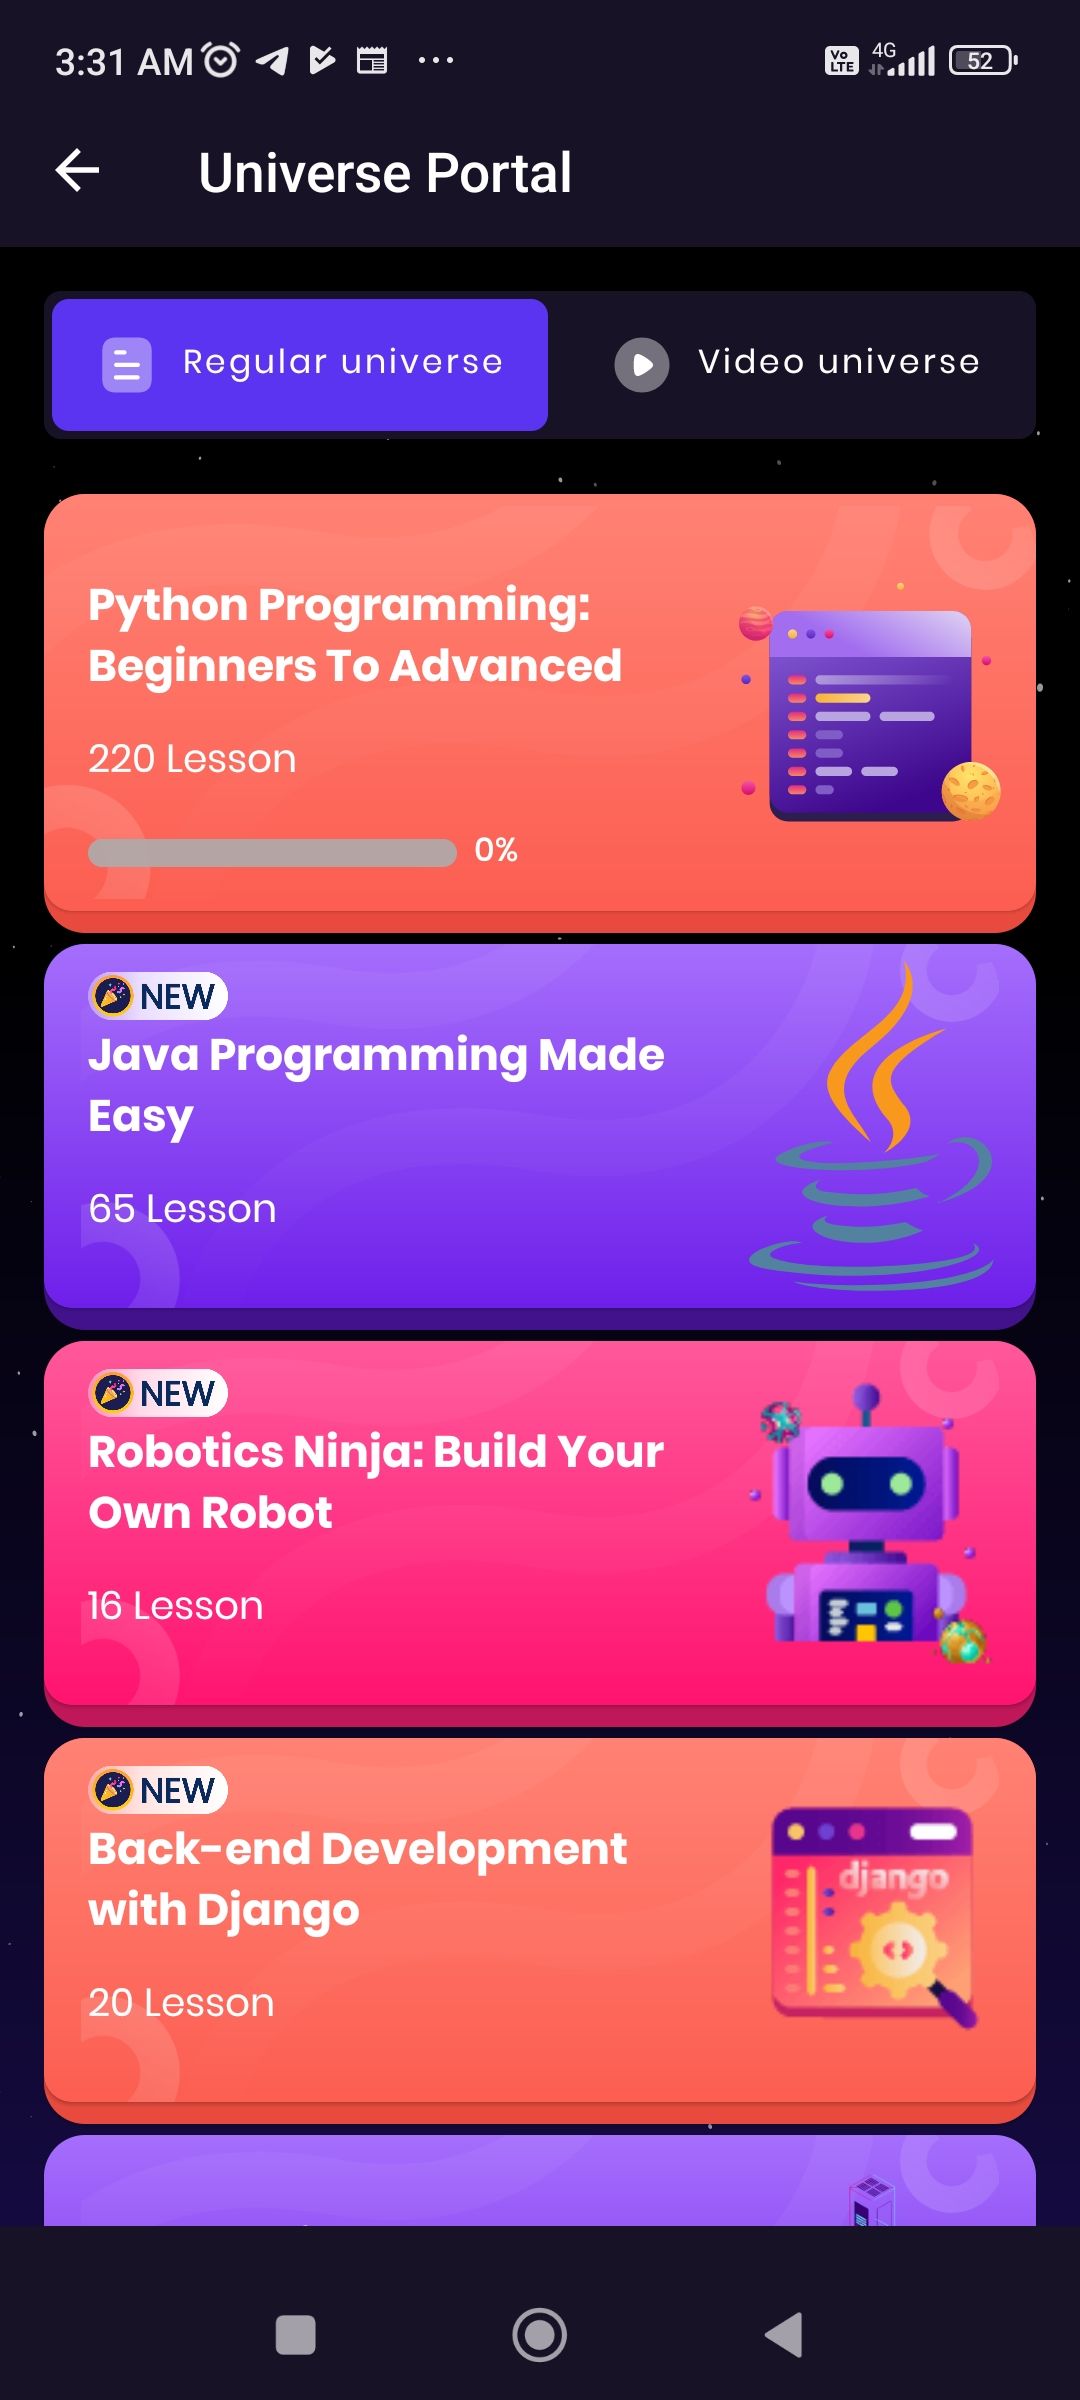 Programming Hero Universal Portal listing all available courses